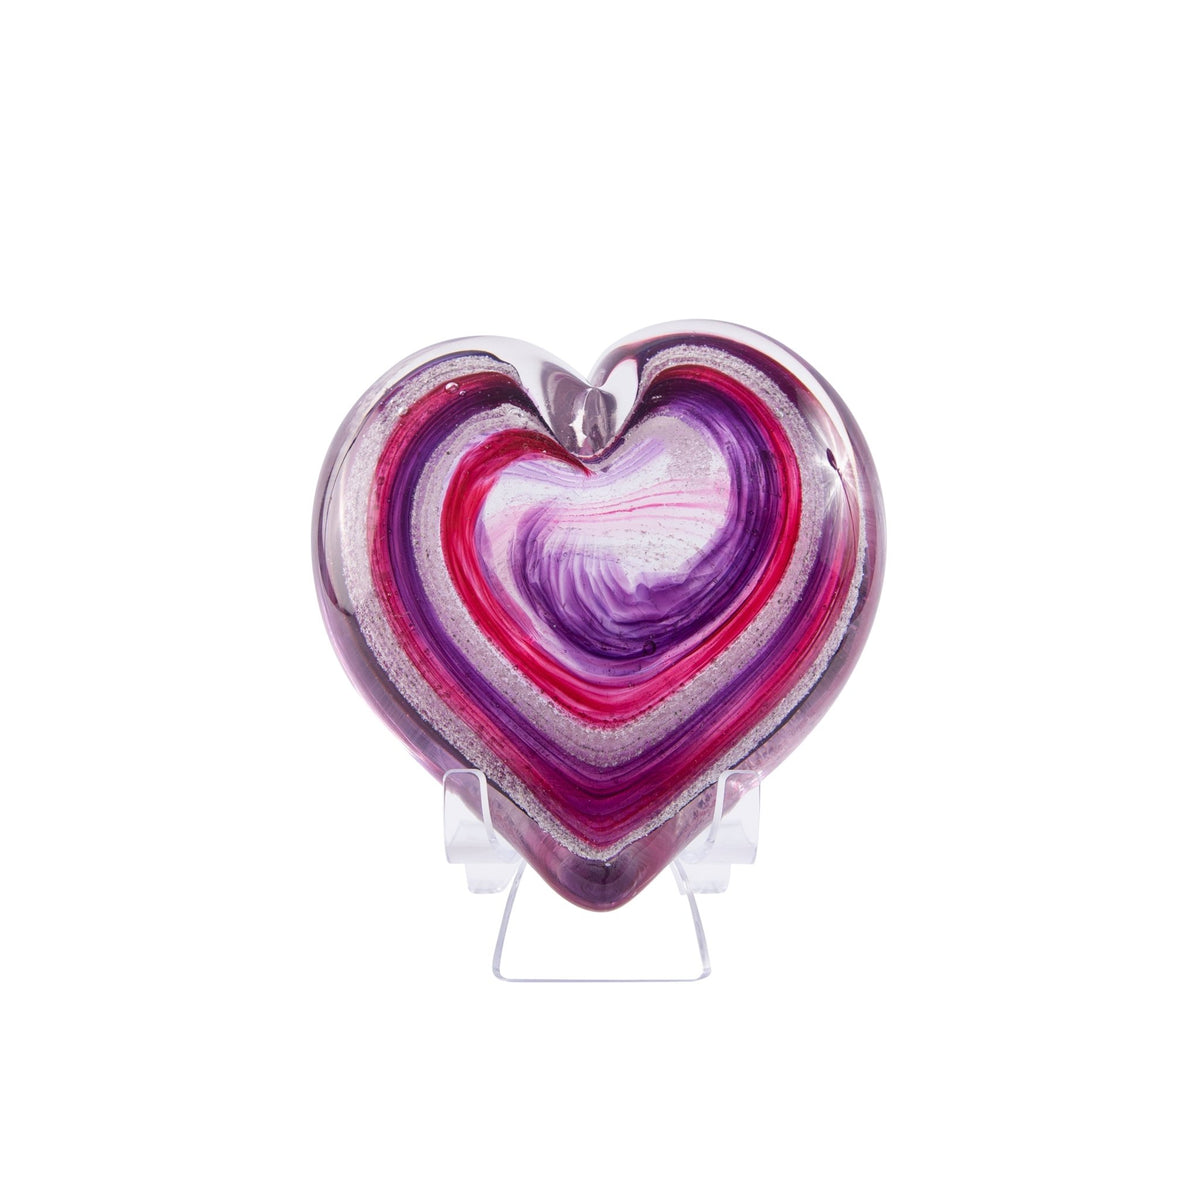 Glass Heart with Ashes  Soulbursts Cremation Glass Art